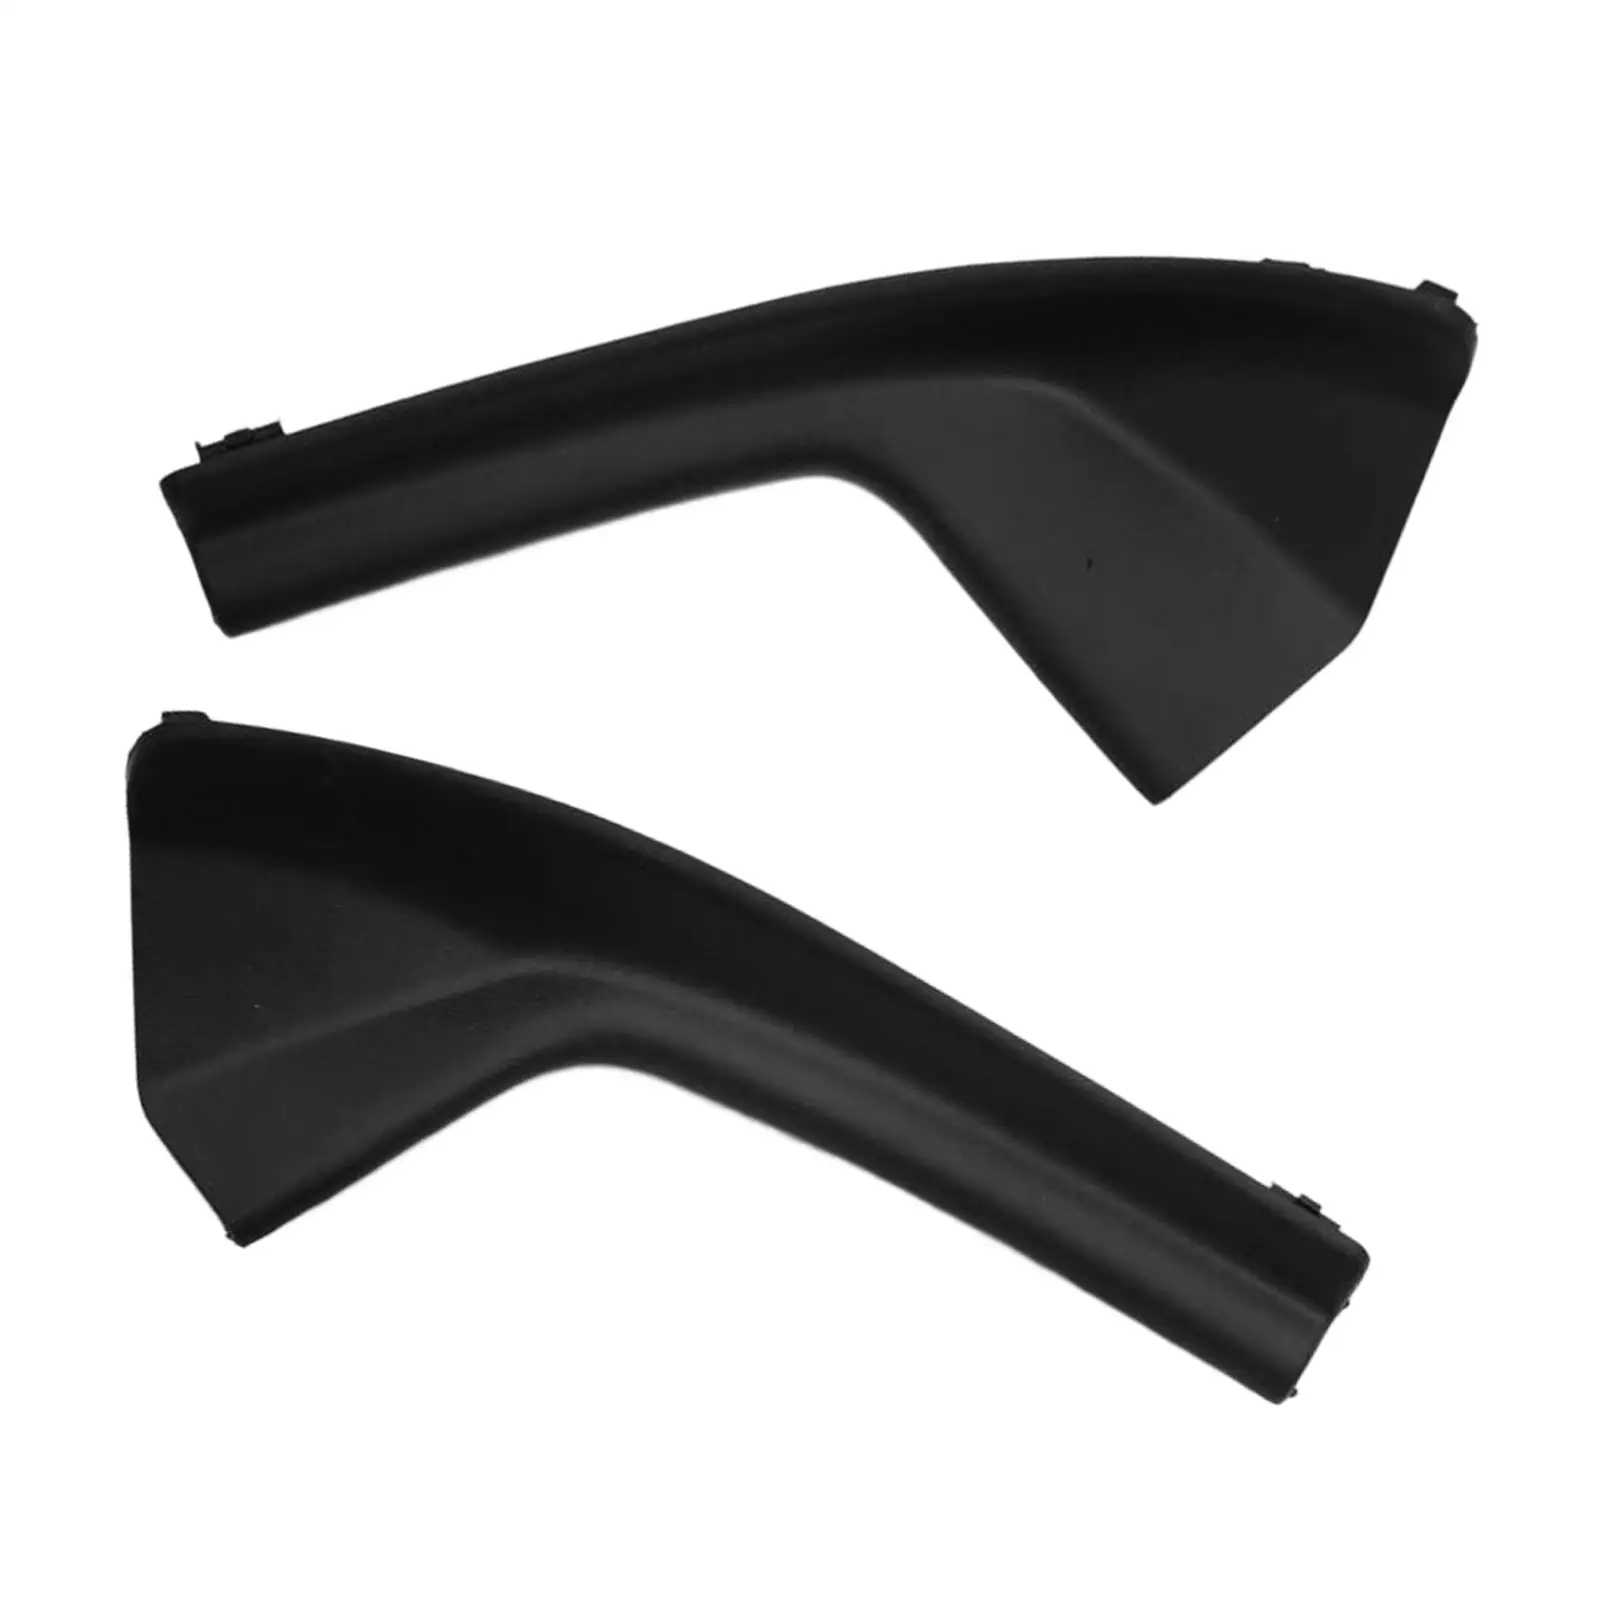 2 Pieces Windshield Wiper Cowl Cover Trim 66895-ed50A 66894-ed500 Durable Water Deflector Cowl Plate for Nissan Versa Sedan